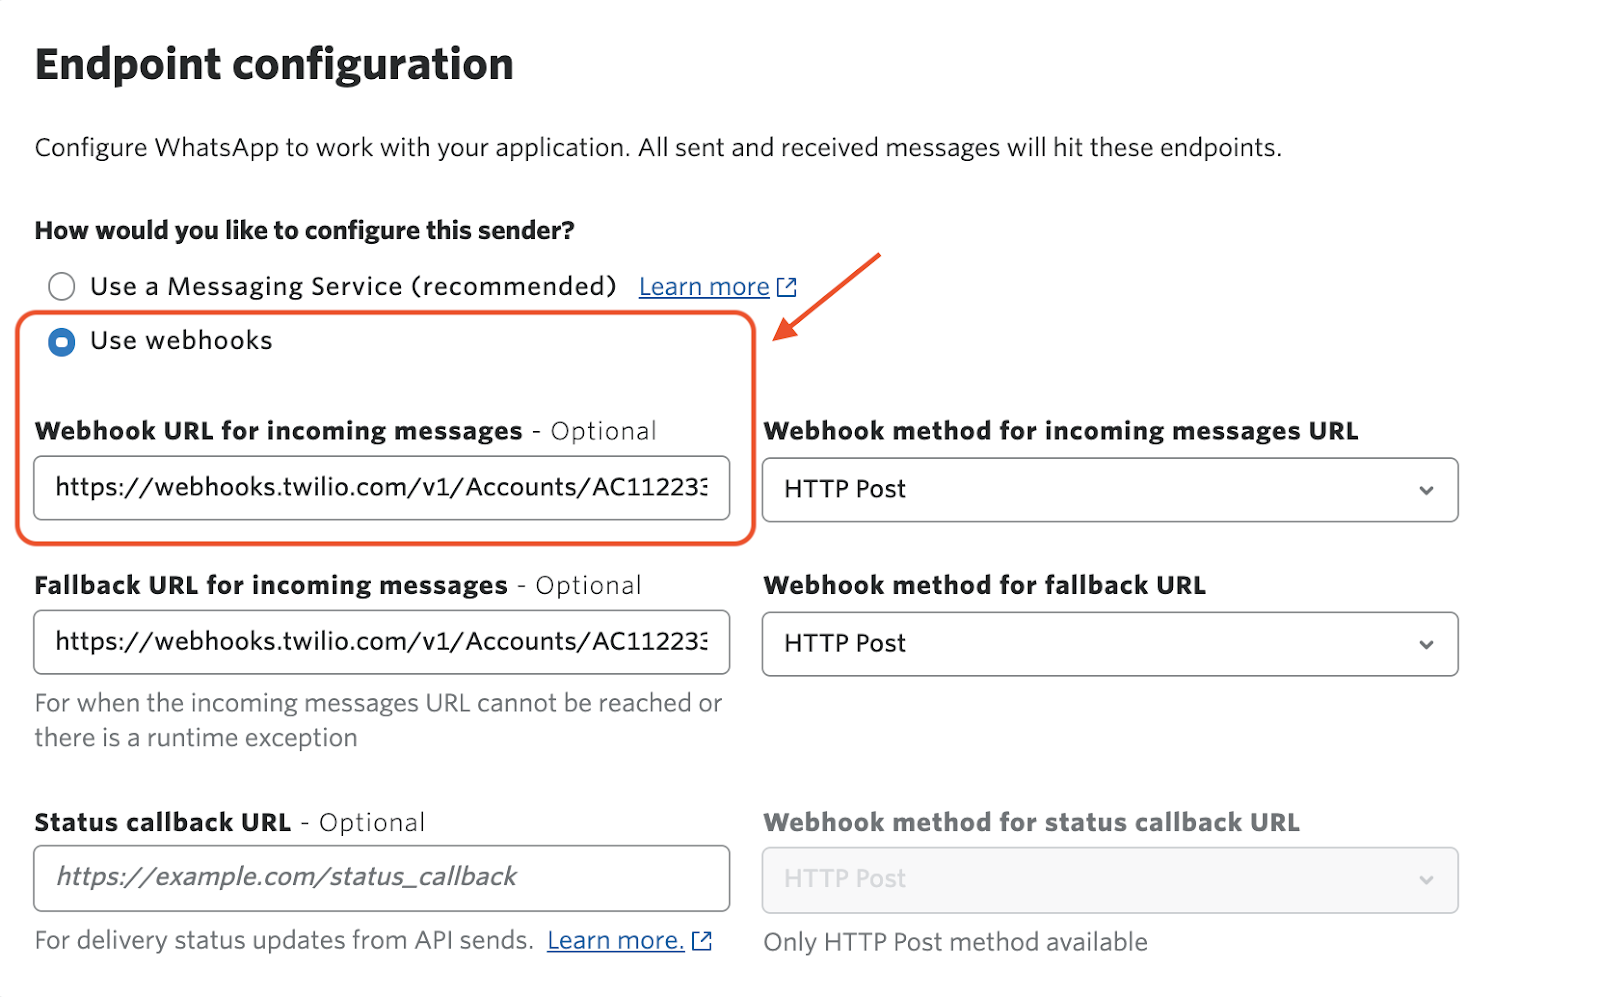 Configure a webhook for incoming messages